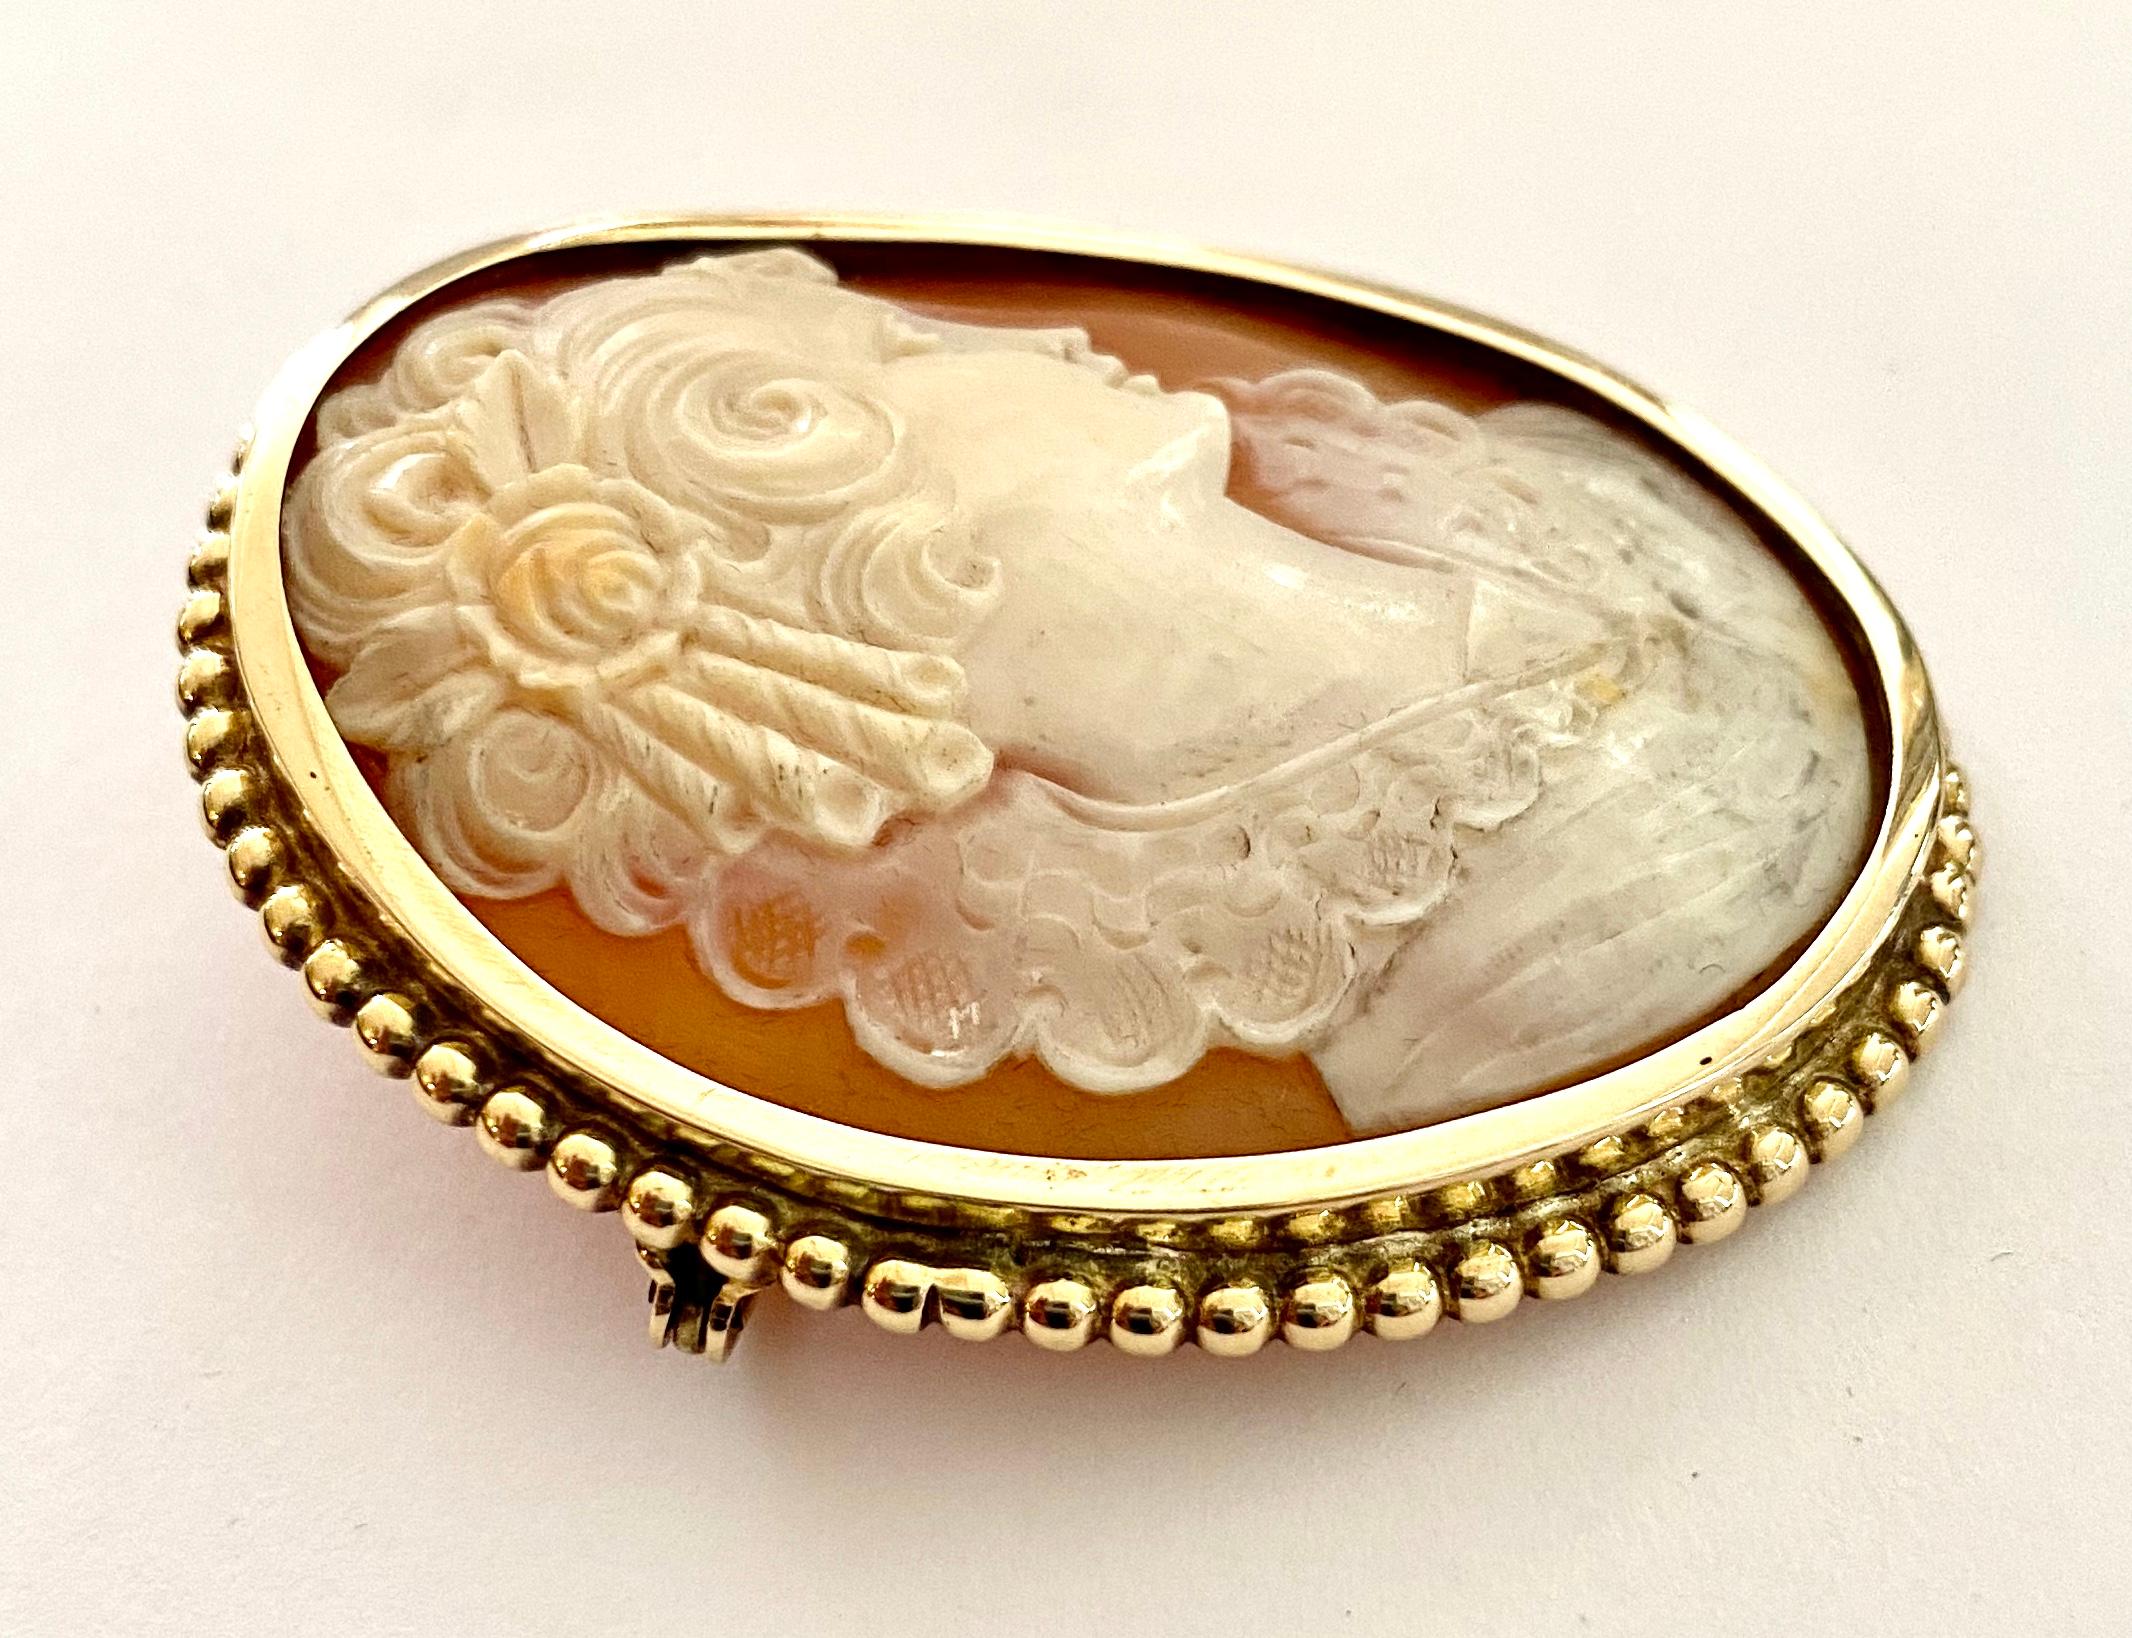 One (1) Gold (Yellow) Brooch, Oval model.
Set with one Natural Mother of Pearl Cameo (Italy 1960)
14K. yellow gold frame, oval with safty lock.   (Gemany 1960)
Measurements   51 x 41 x 8 mm
Weight: 20.63 grams